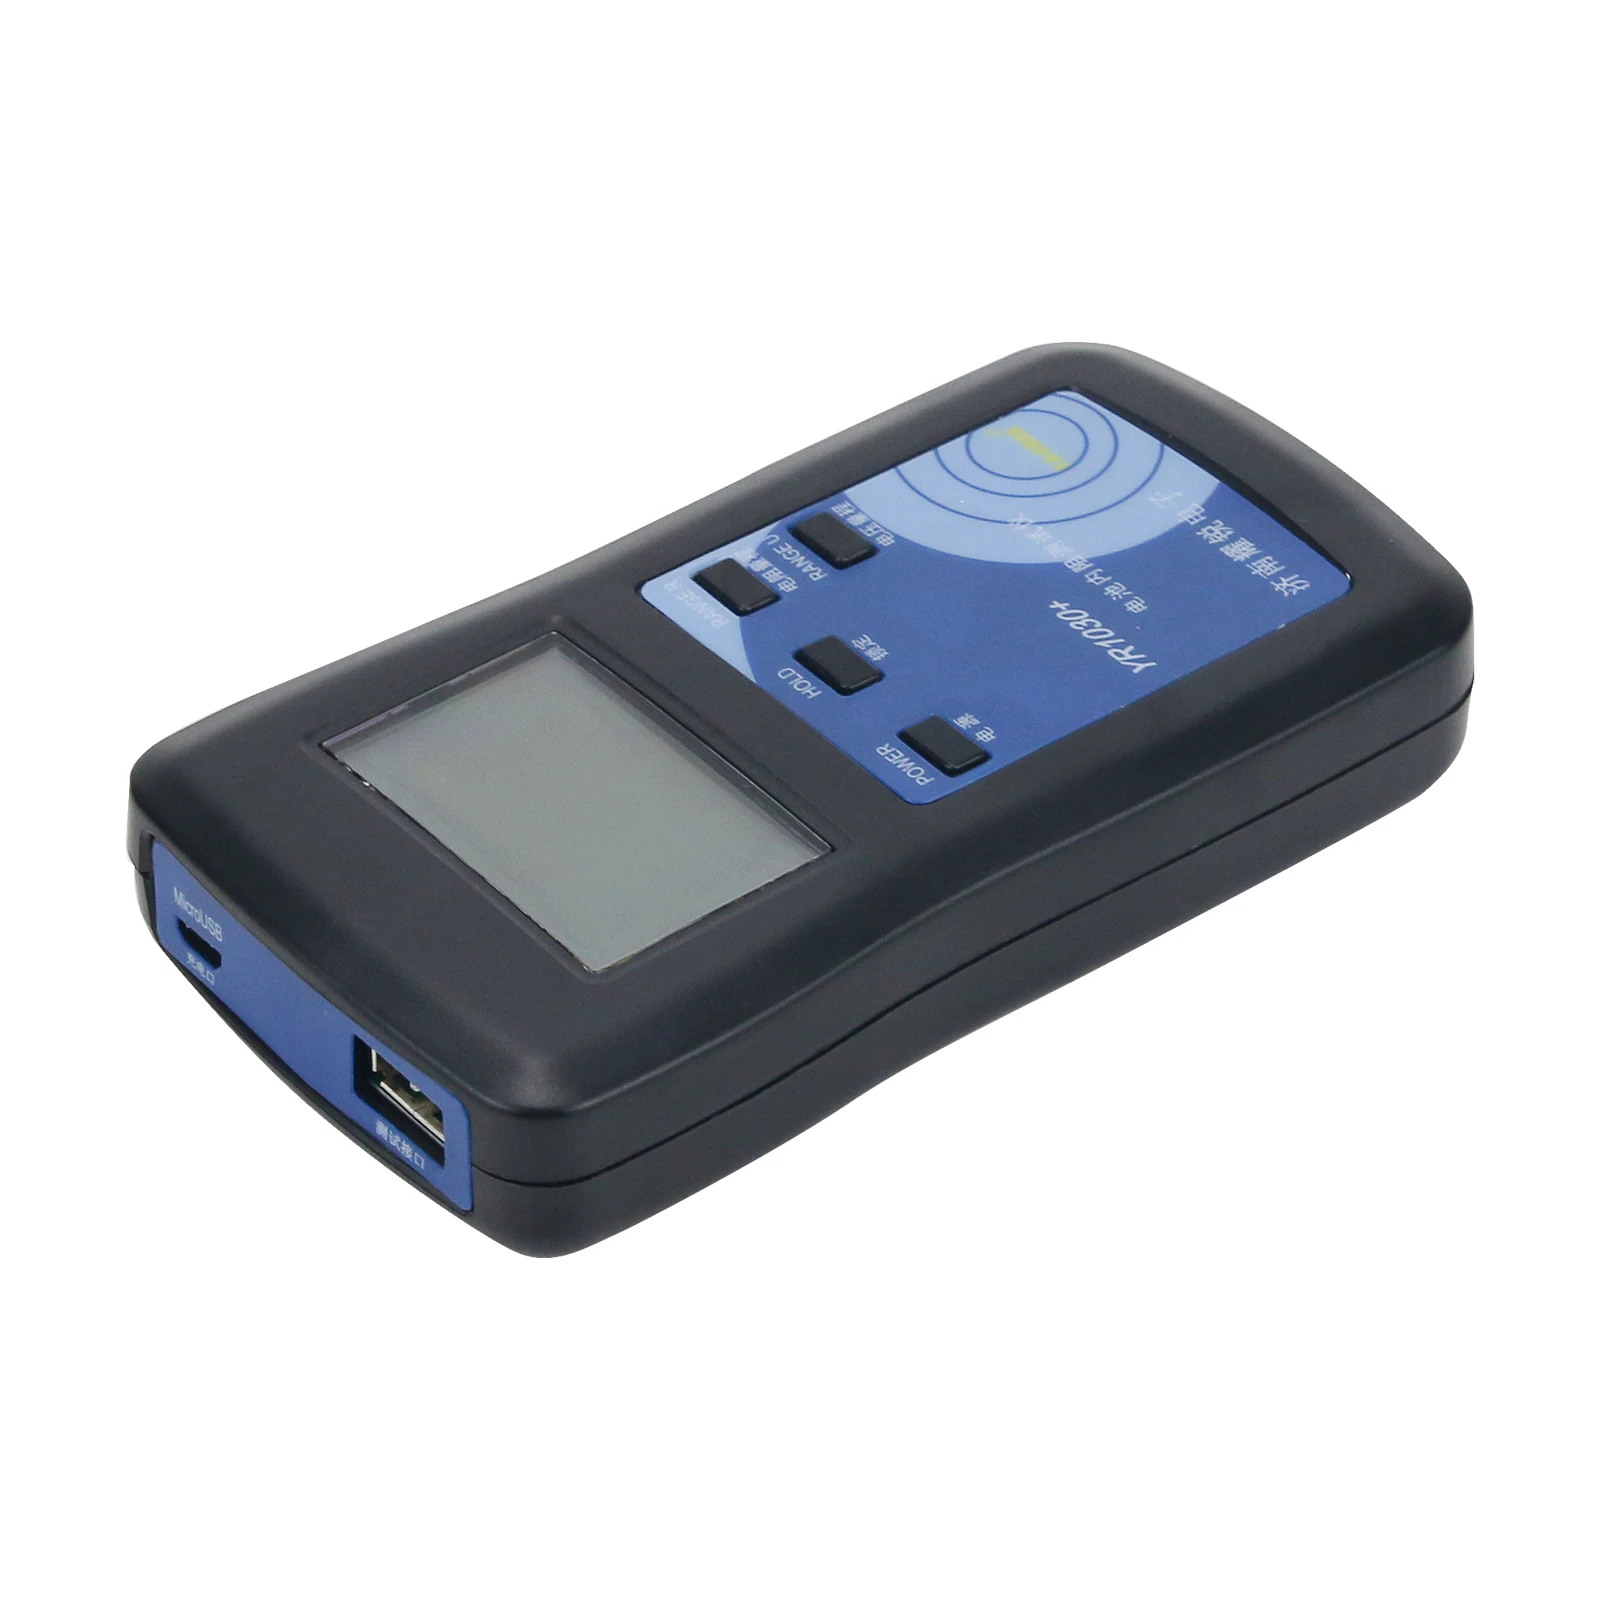 YR1030 Resistance Voltage Tester YR1030 battery tester vapcell YR1030  lithium battery tester YR1030 tested by Mooch- 电气在线